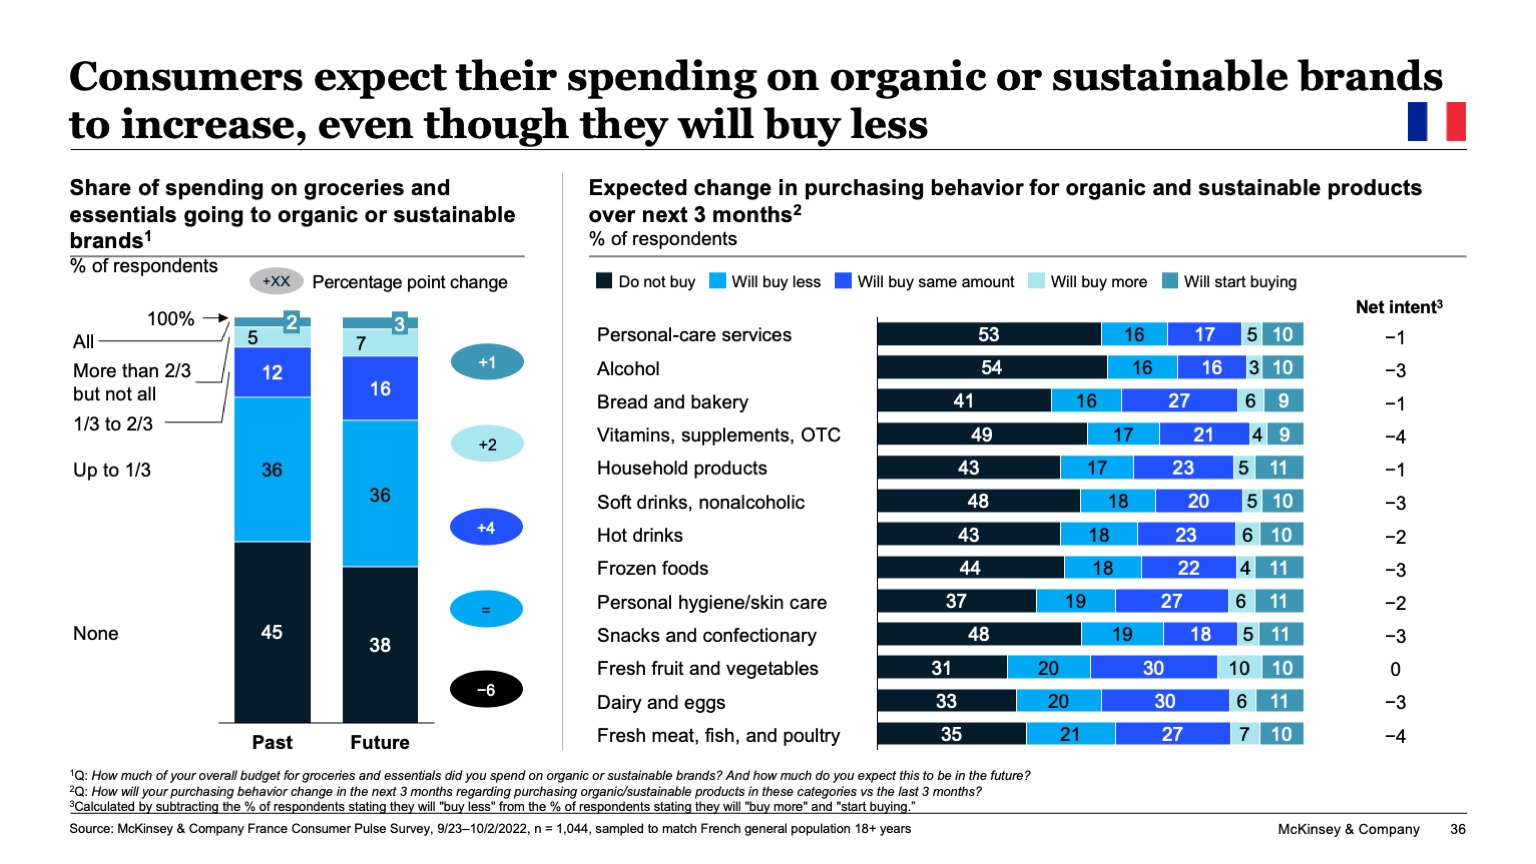 Consumers expect their spending on organic or sustainable brands to increase, even though they will buy less